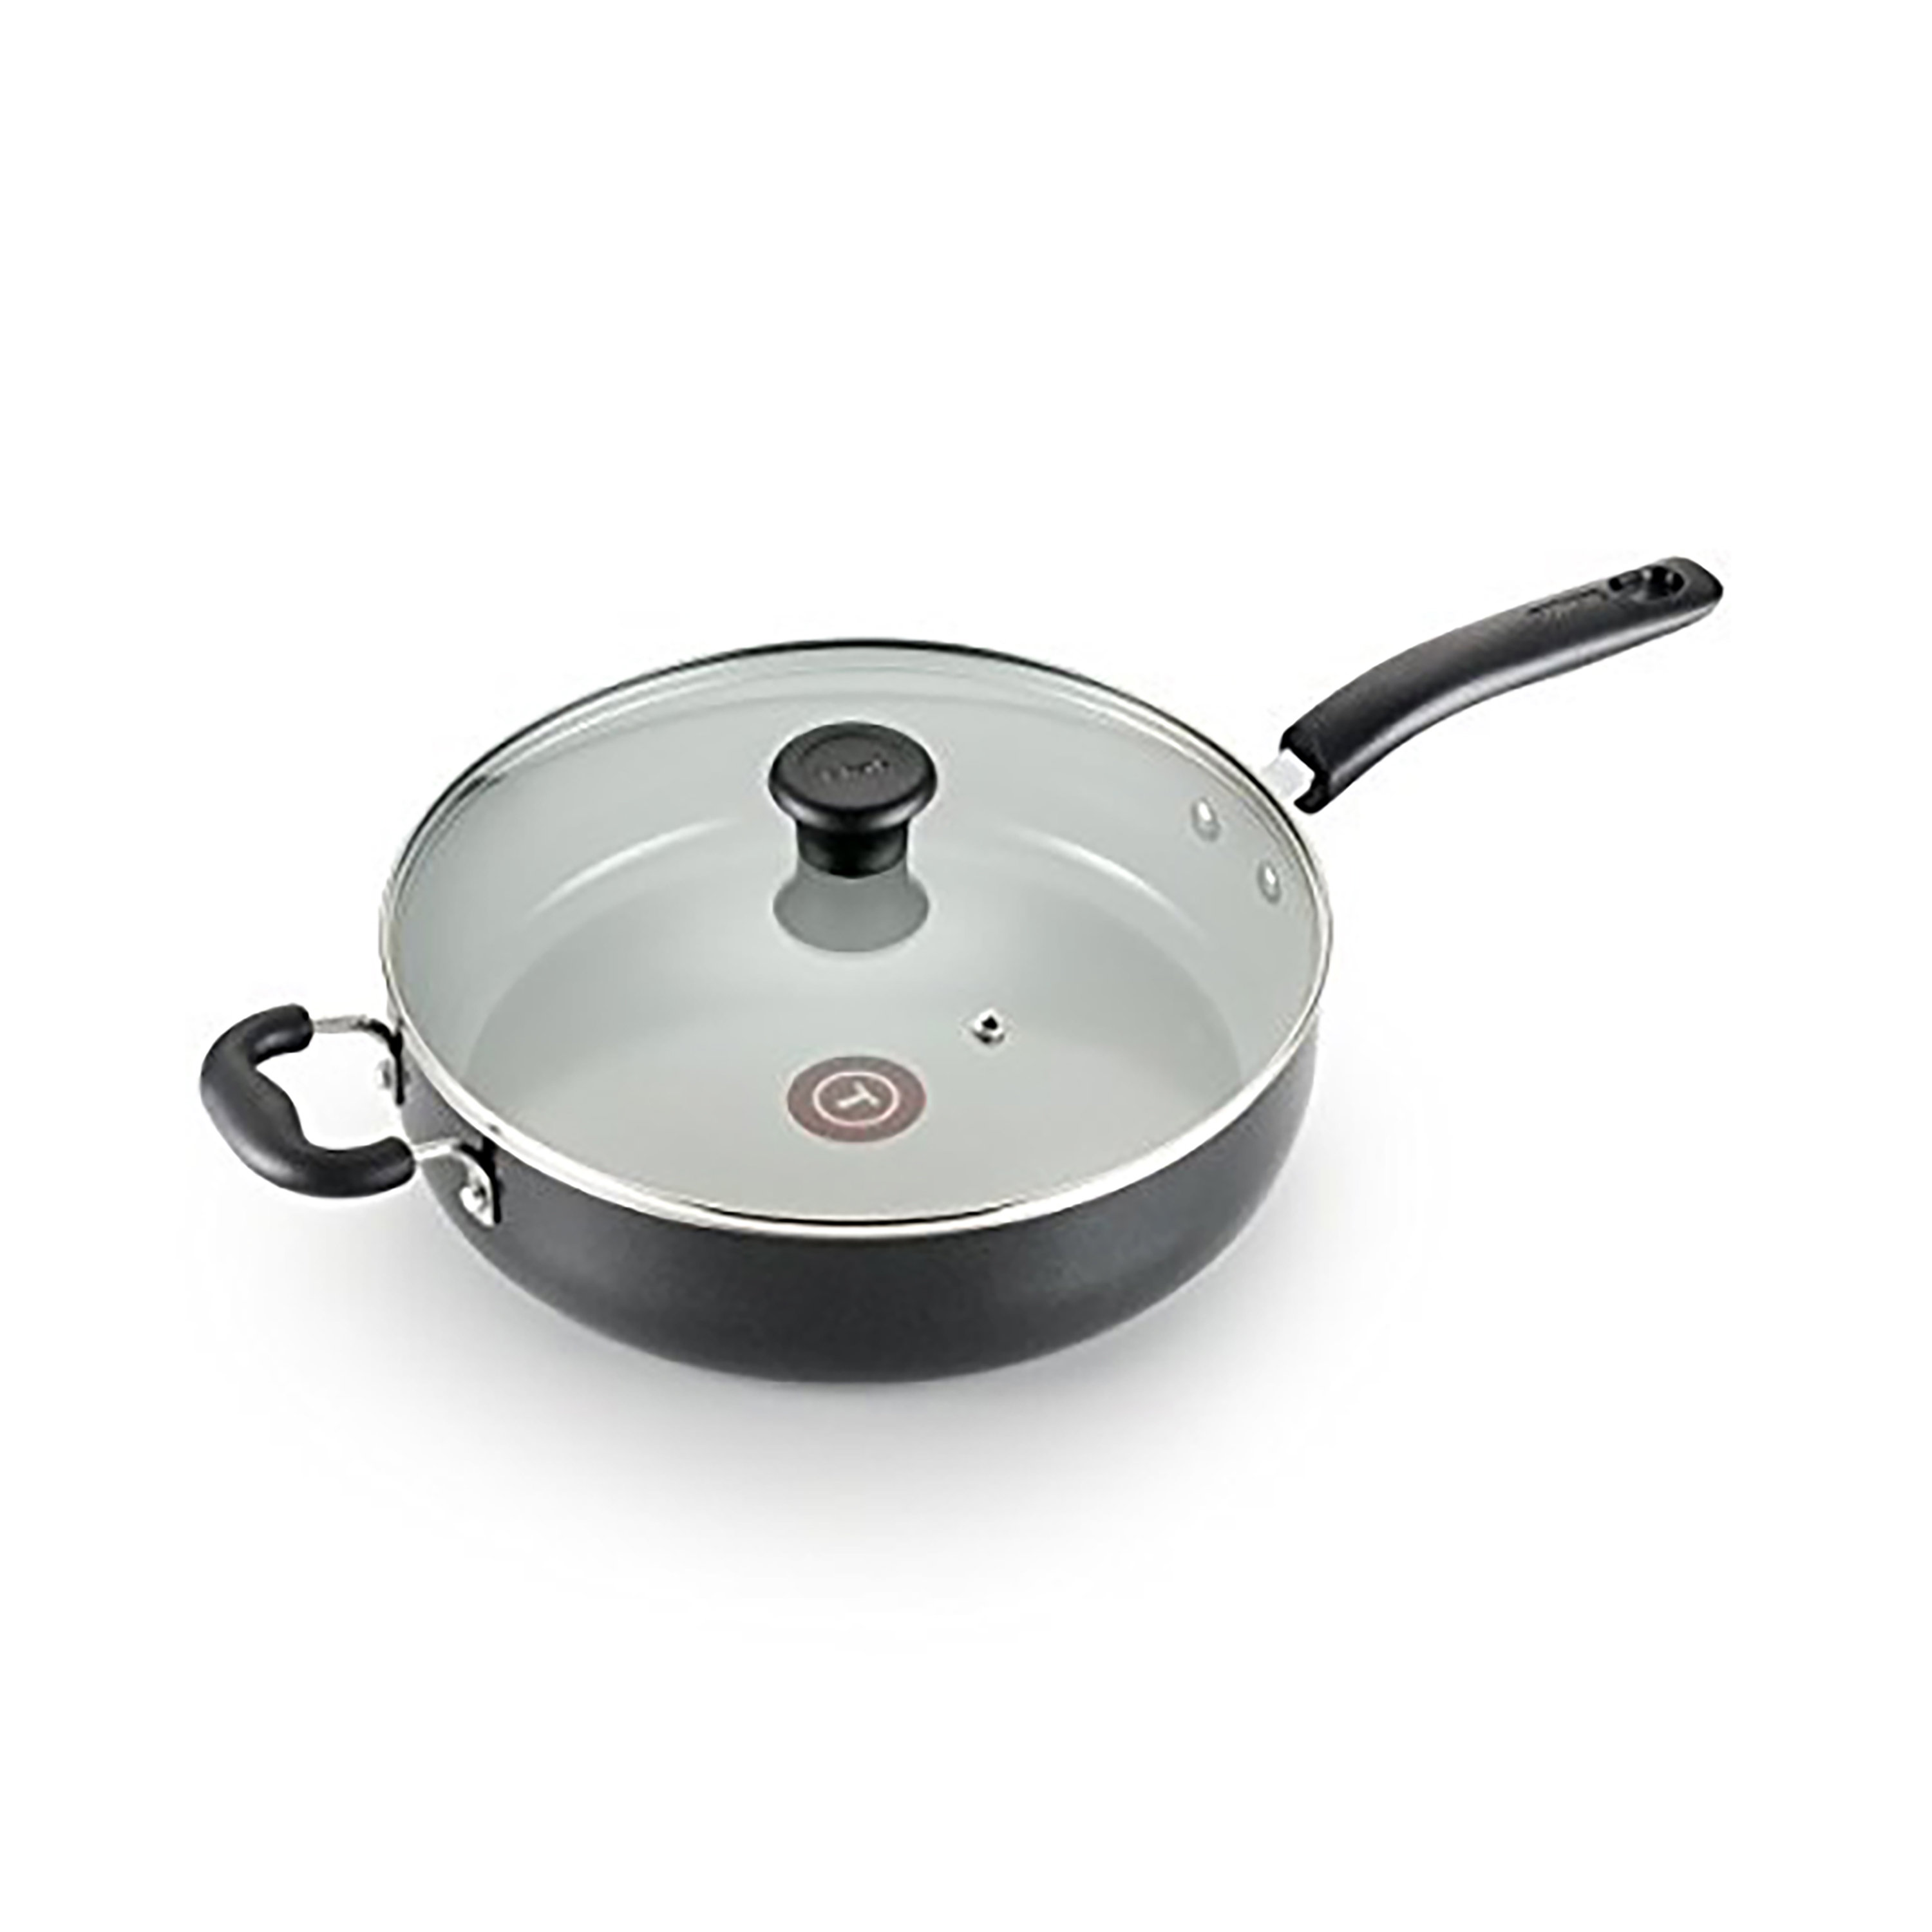 T-fal Platinum Nonstick 12-inch Fry Pan, Endurance Collection 